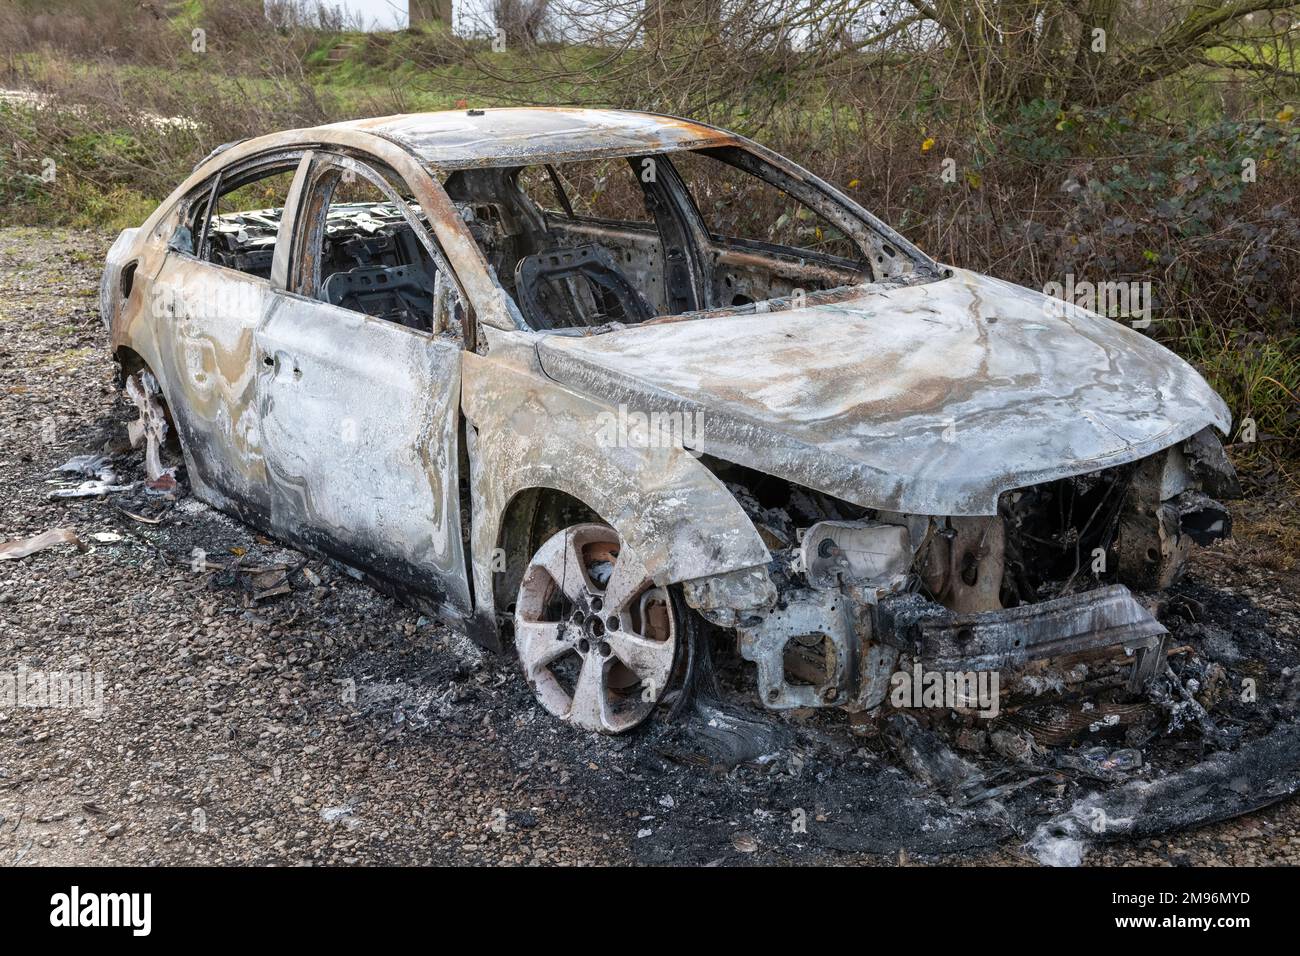 A burnt out modern car abandoned on waste ground in the UK Stock Photo